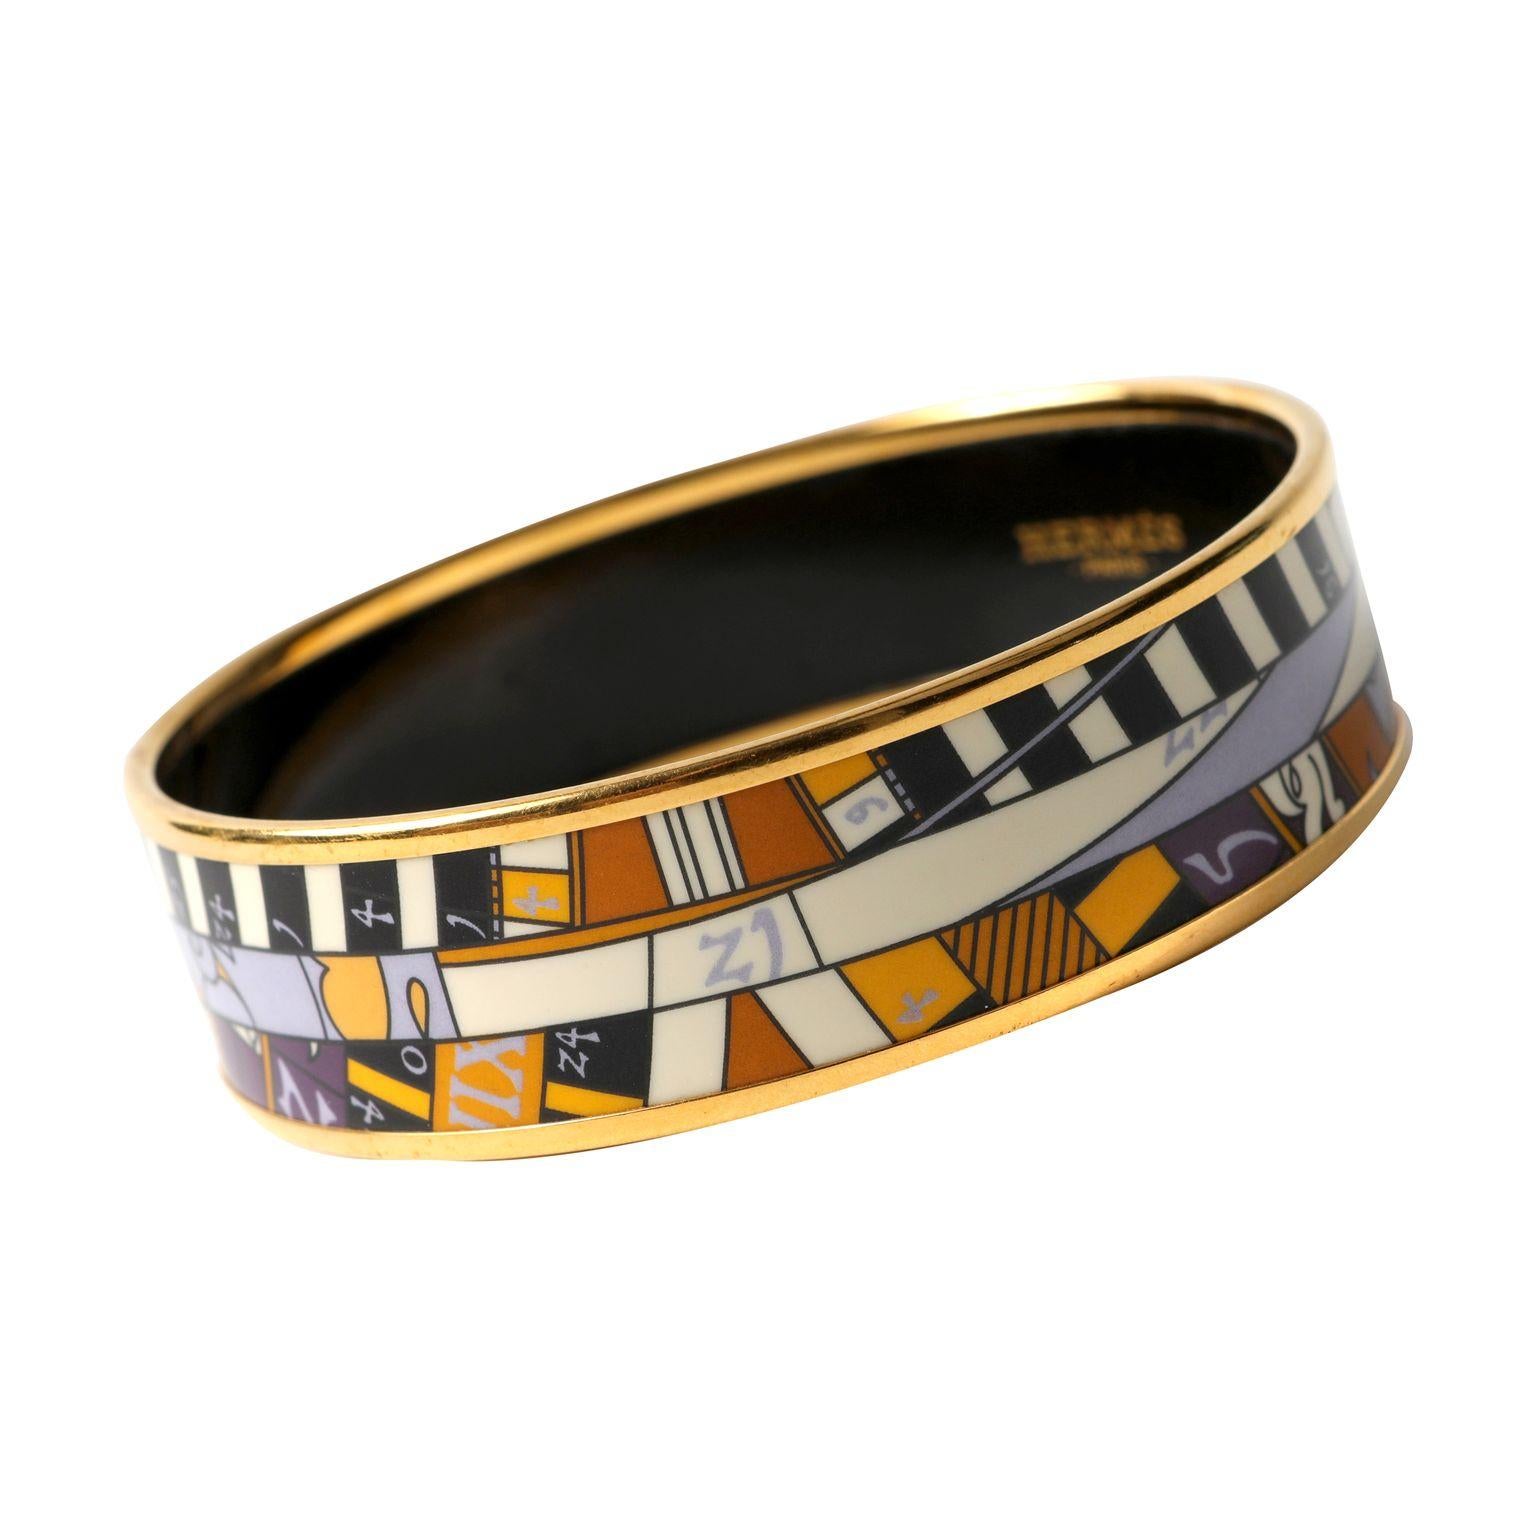 This authentic Hermès Orange and Purple Enamel Bangle is in excellent condition.  Enamel printed bangle with gold hardware.  Size 65.  Pouch or box included.

PBF 13872

